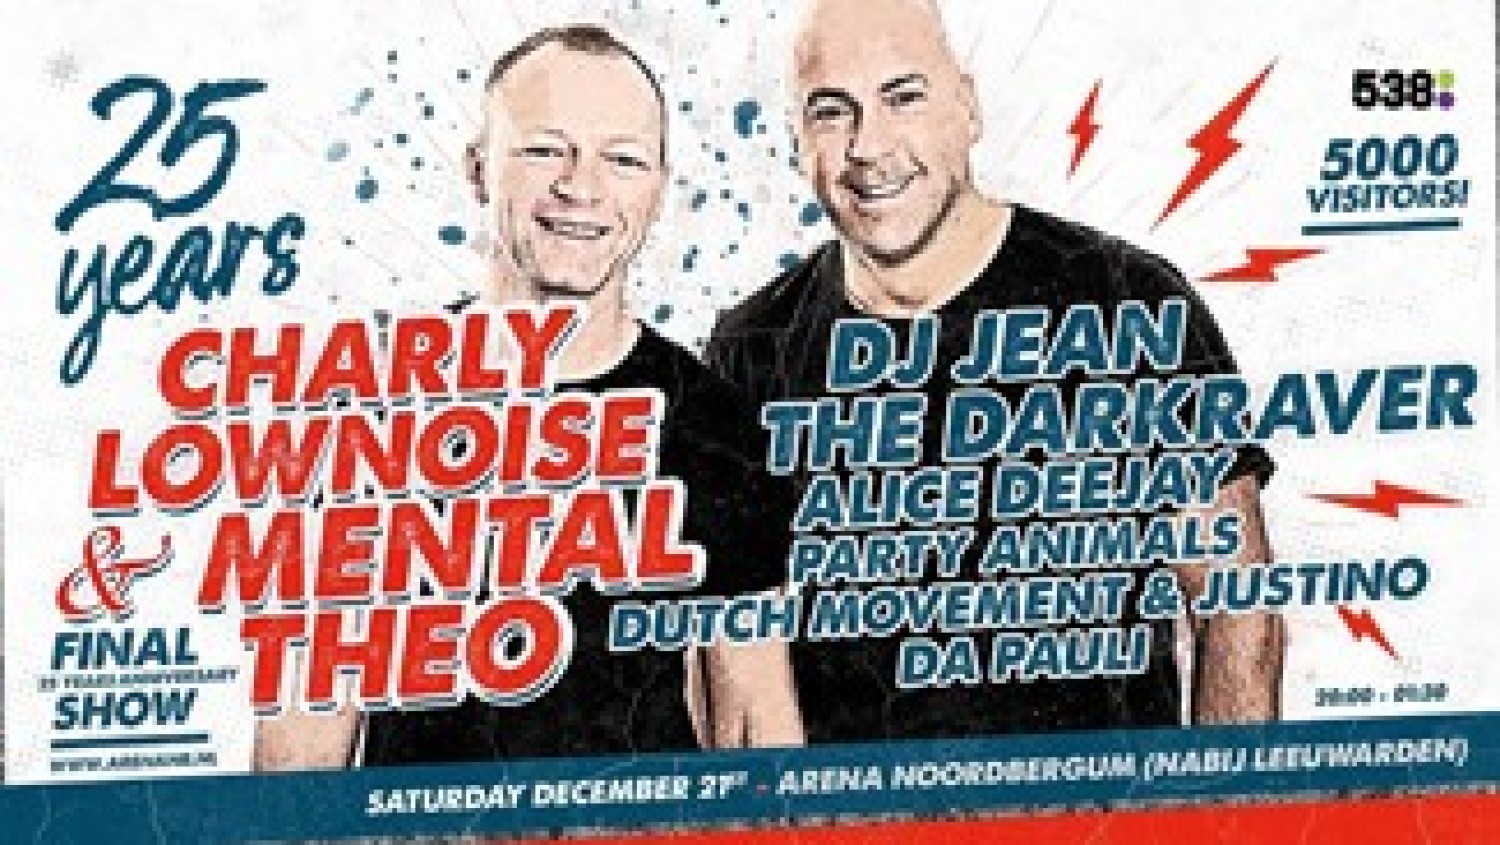 Party nieuws: 25 Years Charly Lownoise & Mental Theo: laatste show